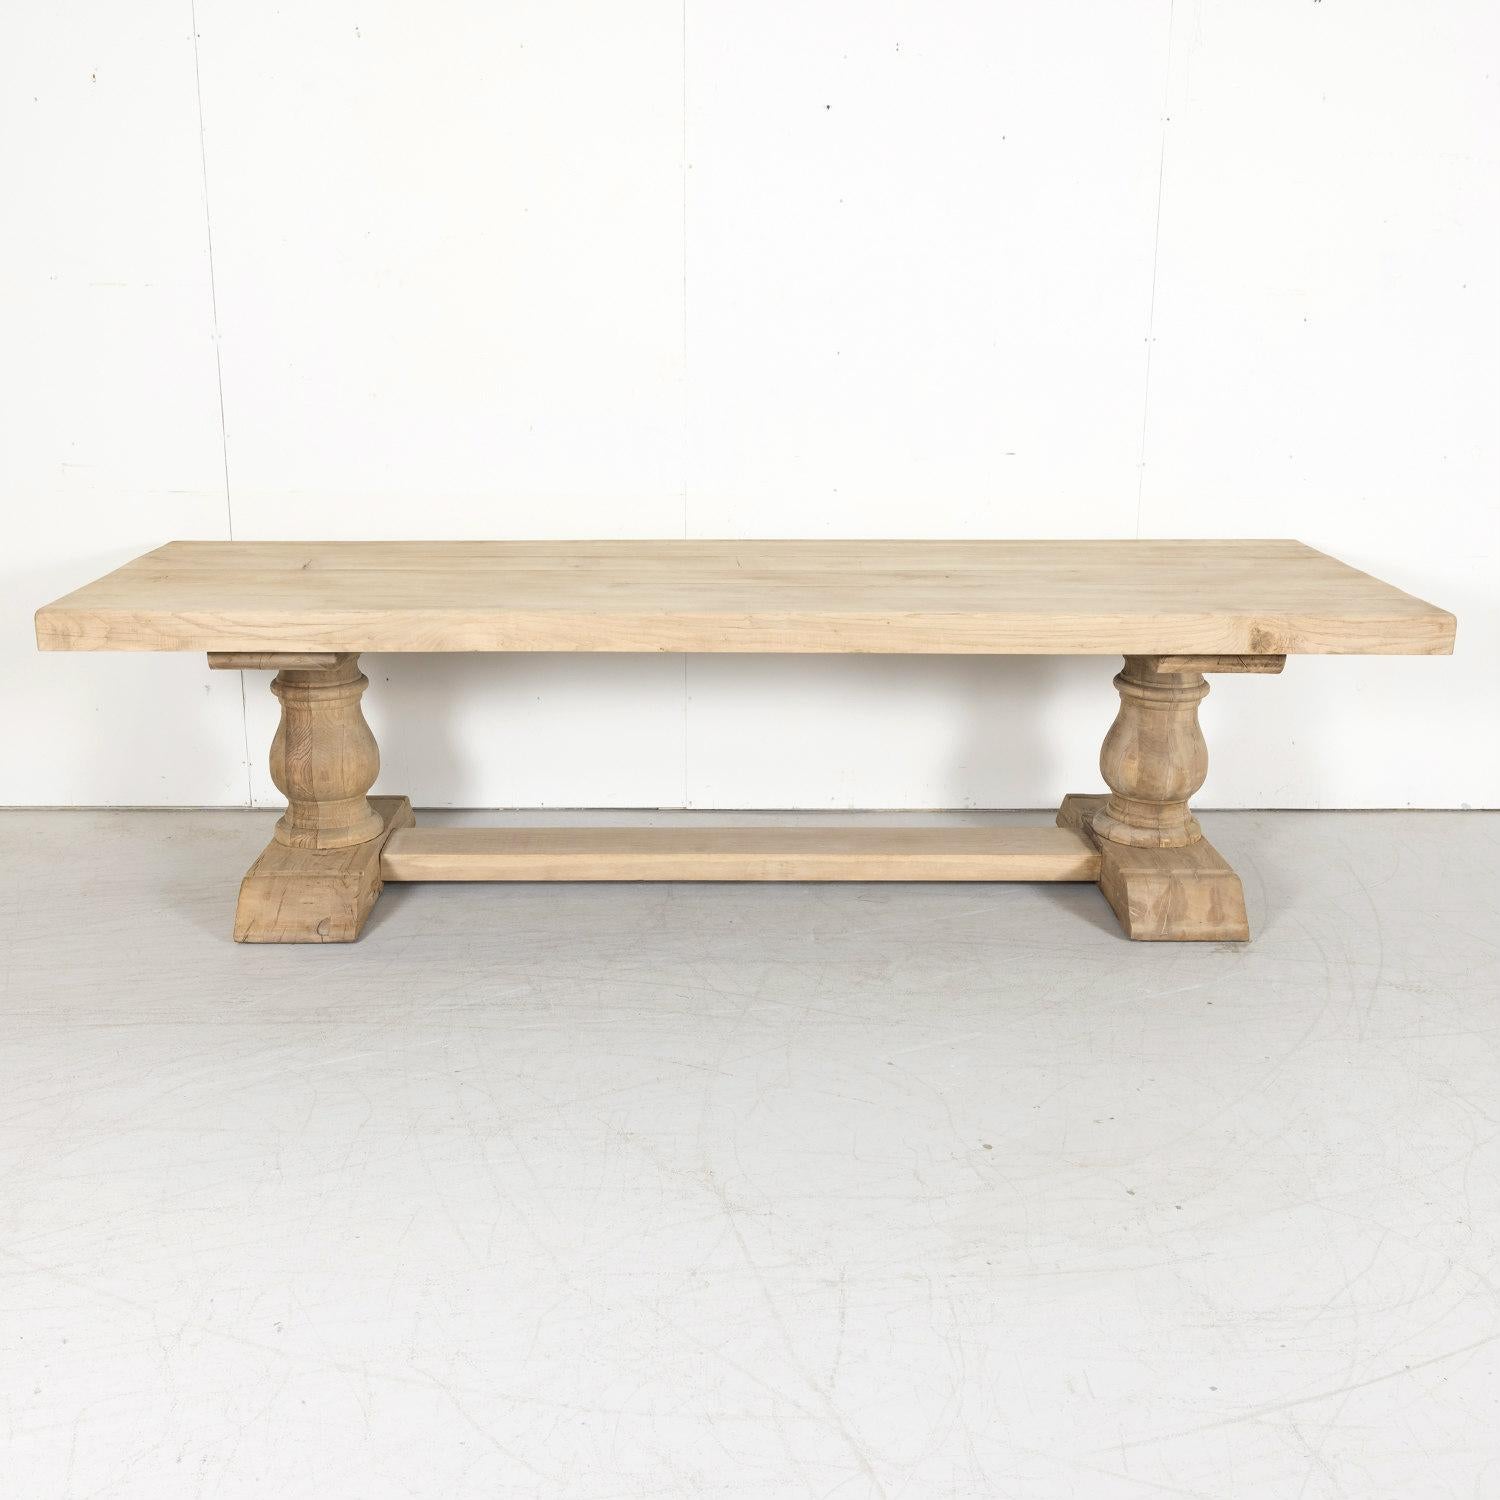 Early 20th Century Bleached Oak French Trestle Dining Table with Baluster Legs 1